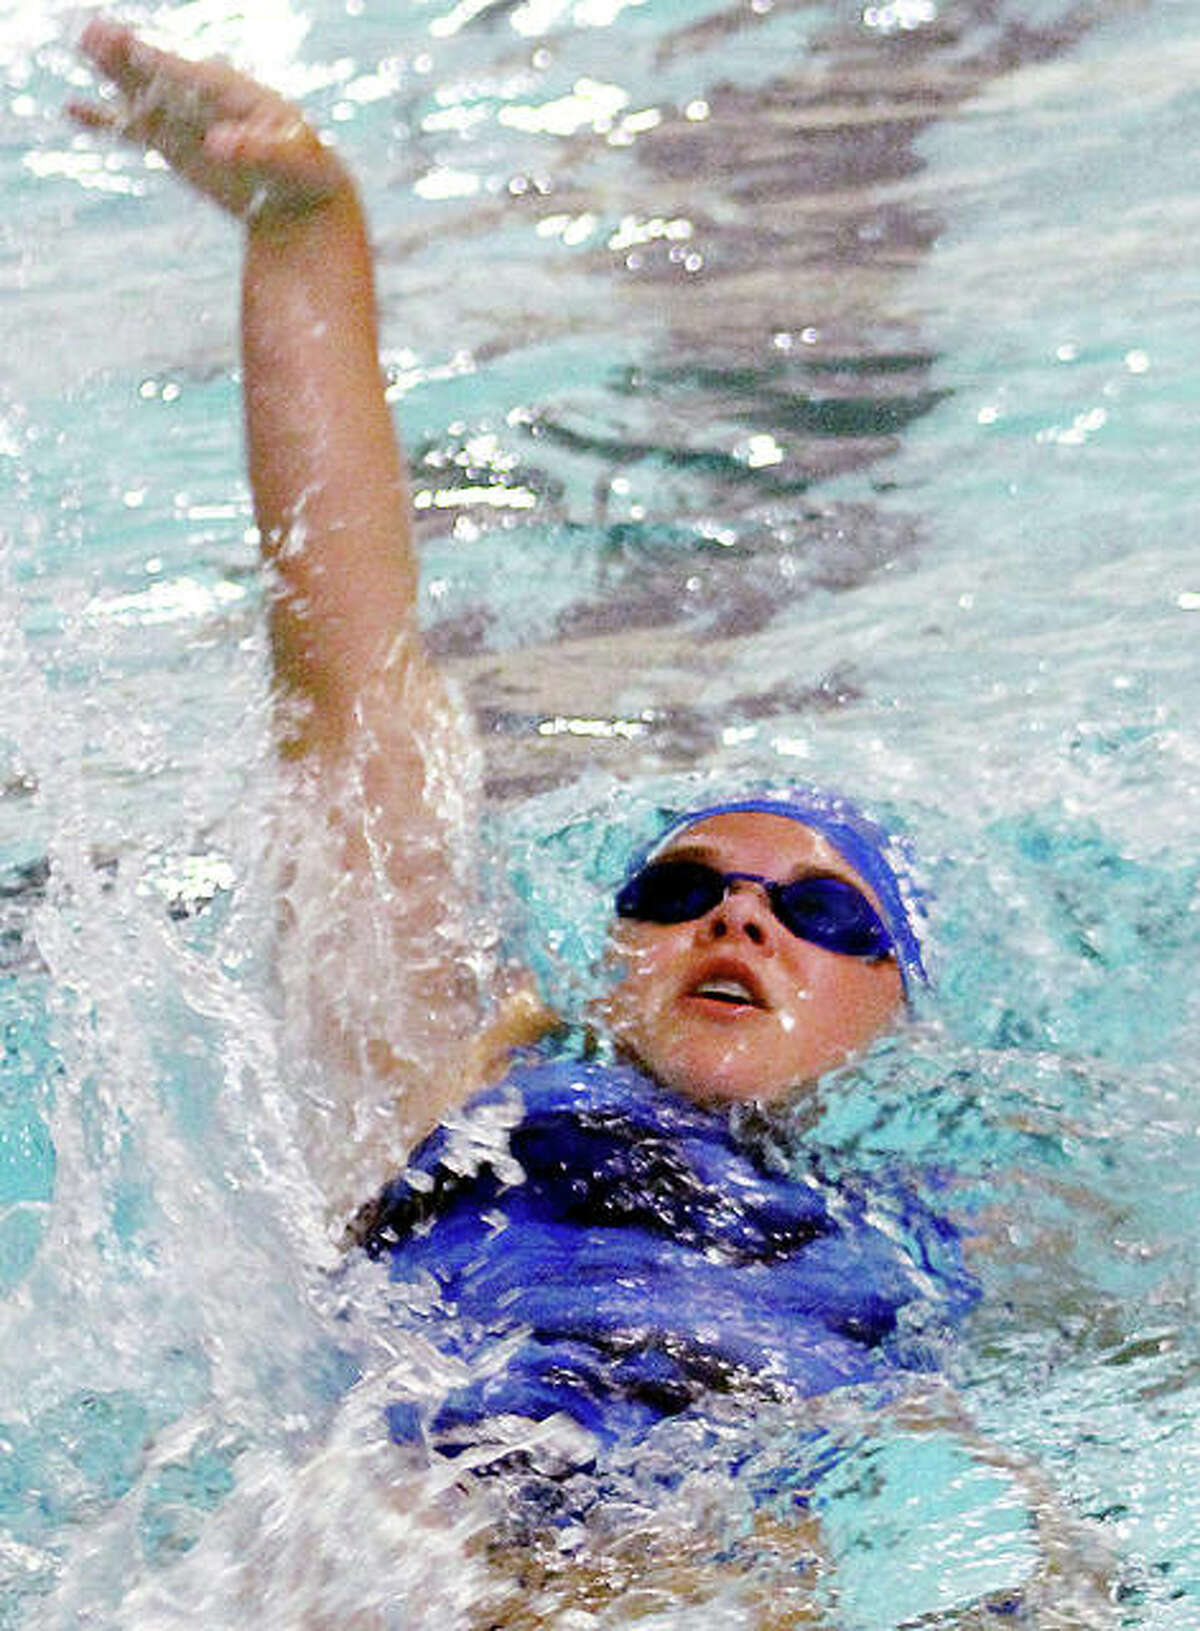 Freshman Grace Middleton is one of 12 swimmers from Alton High who will take part in a five-way meet Saturday in at the Chuck Fruit Aquatic Center in preparation for the IHSA Girls Sectional Meet, also in Edwardsville, set for Oct. 24